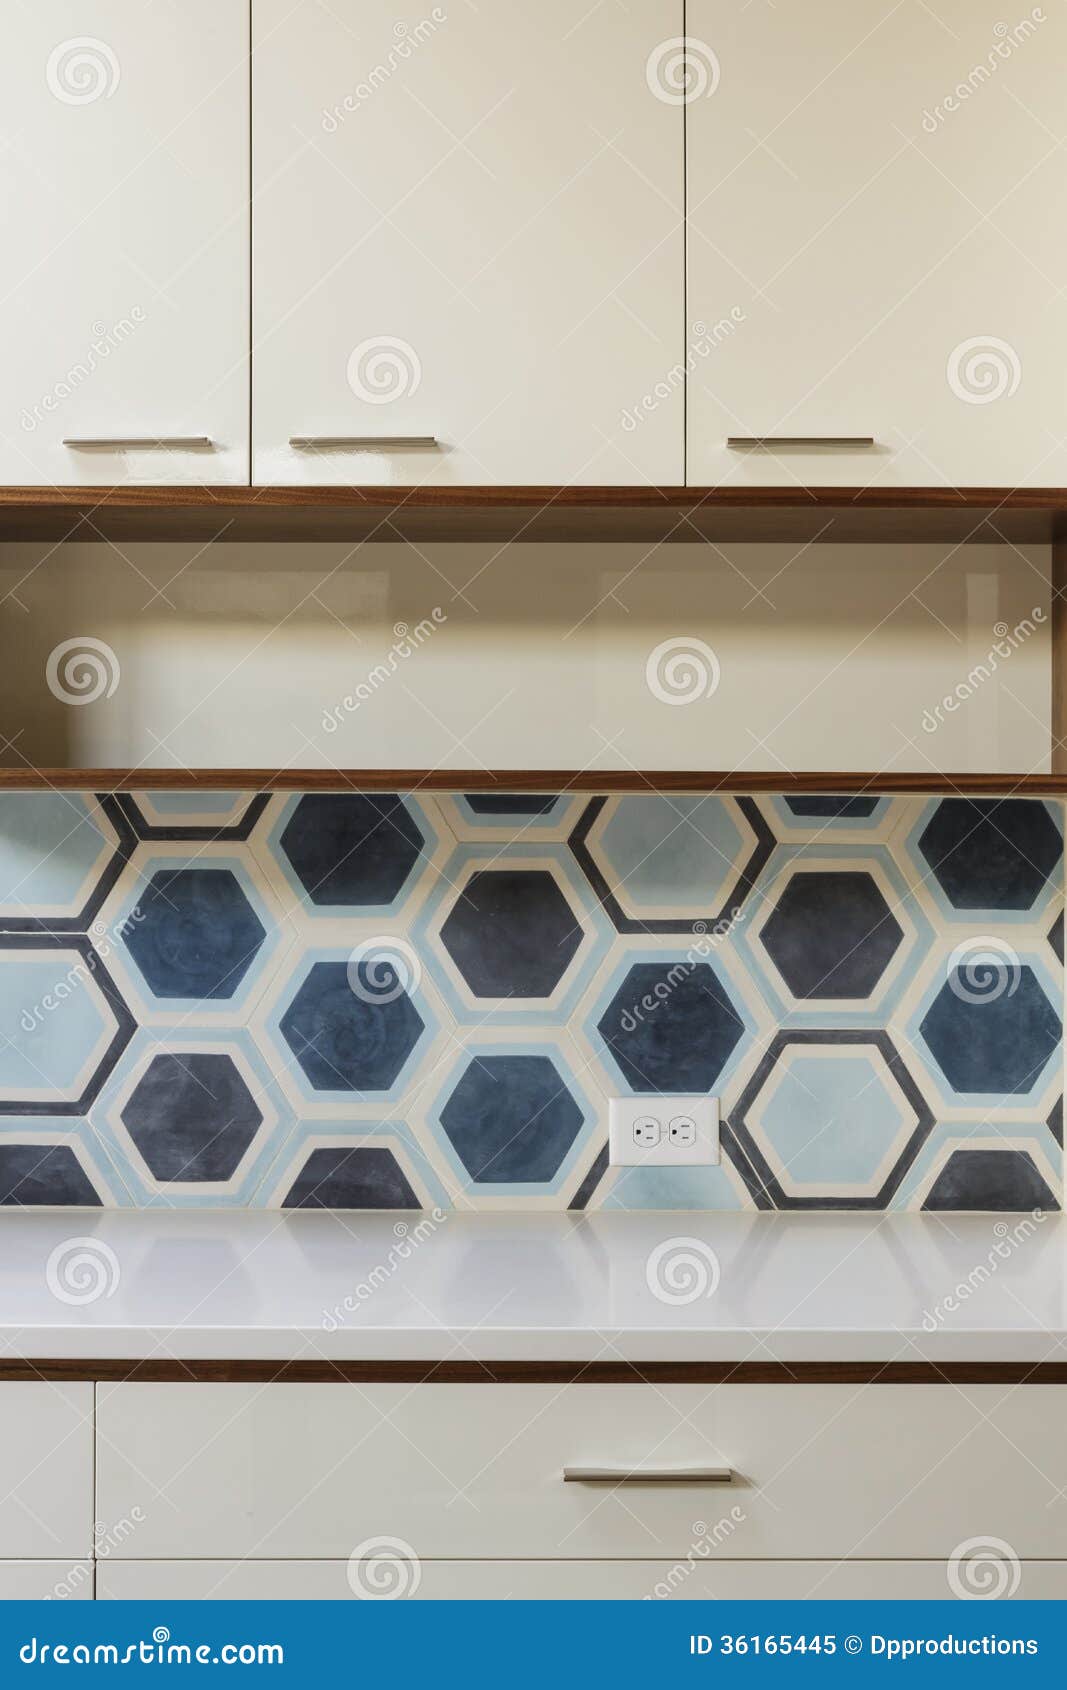 White Kitchen Cabinet In Modern Home With Blue Tile Stock Image